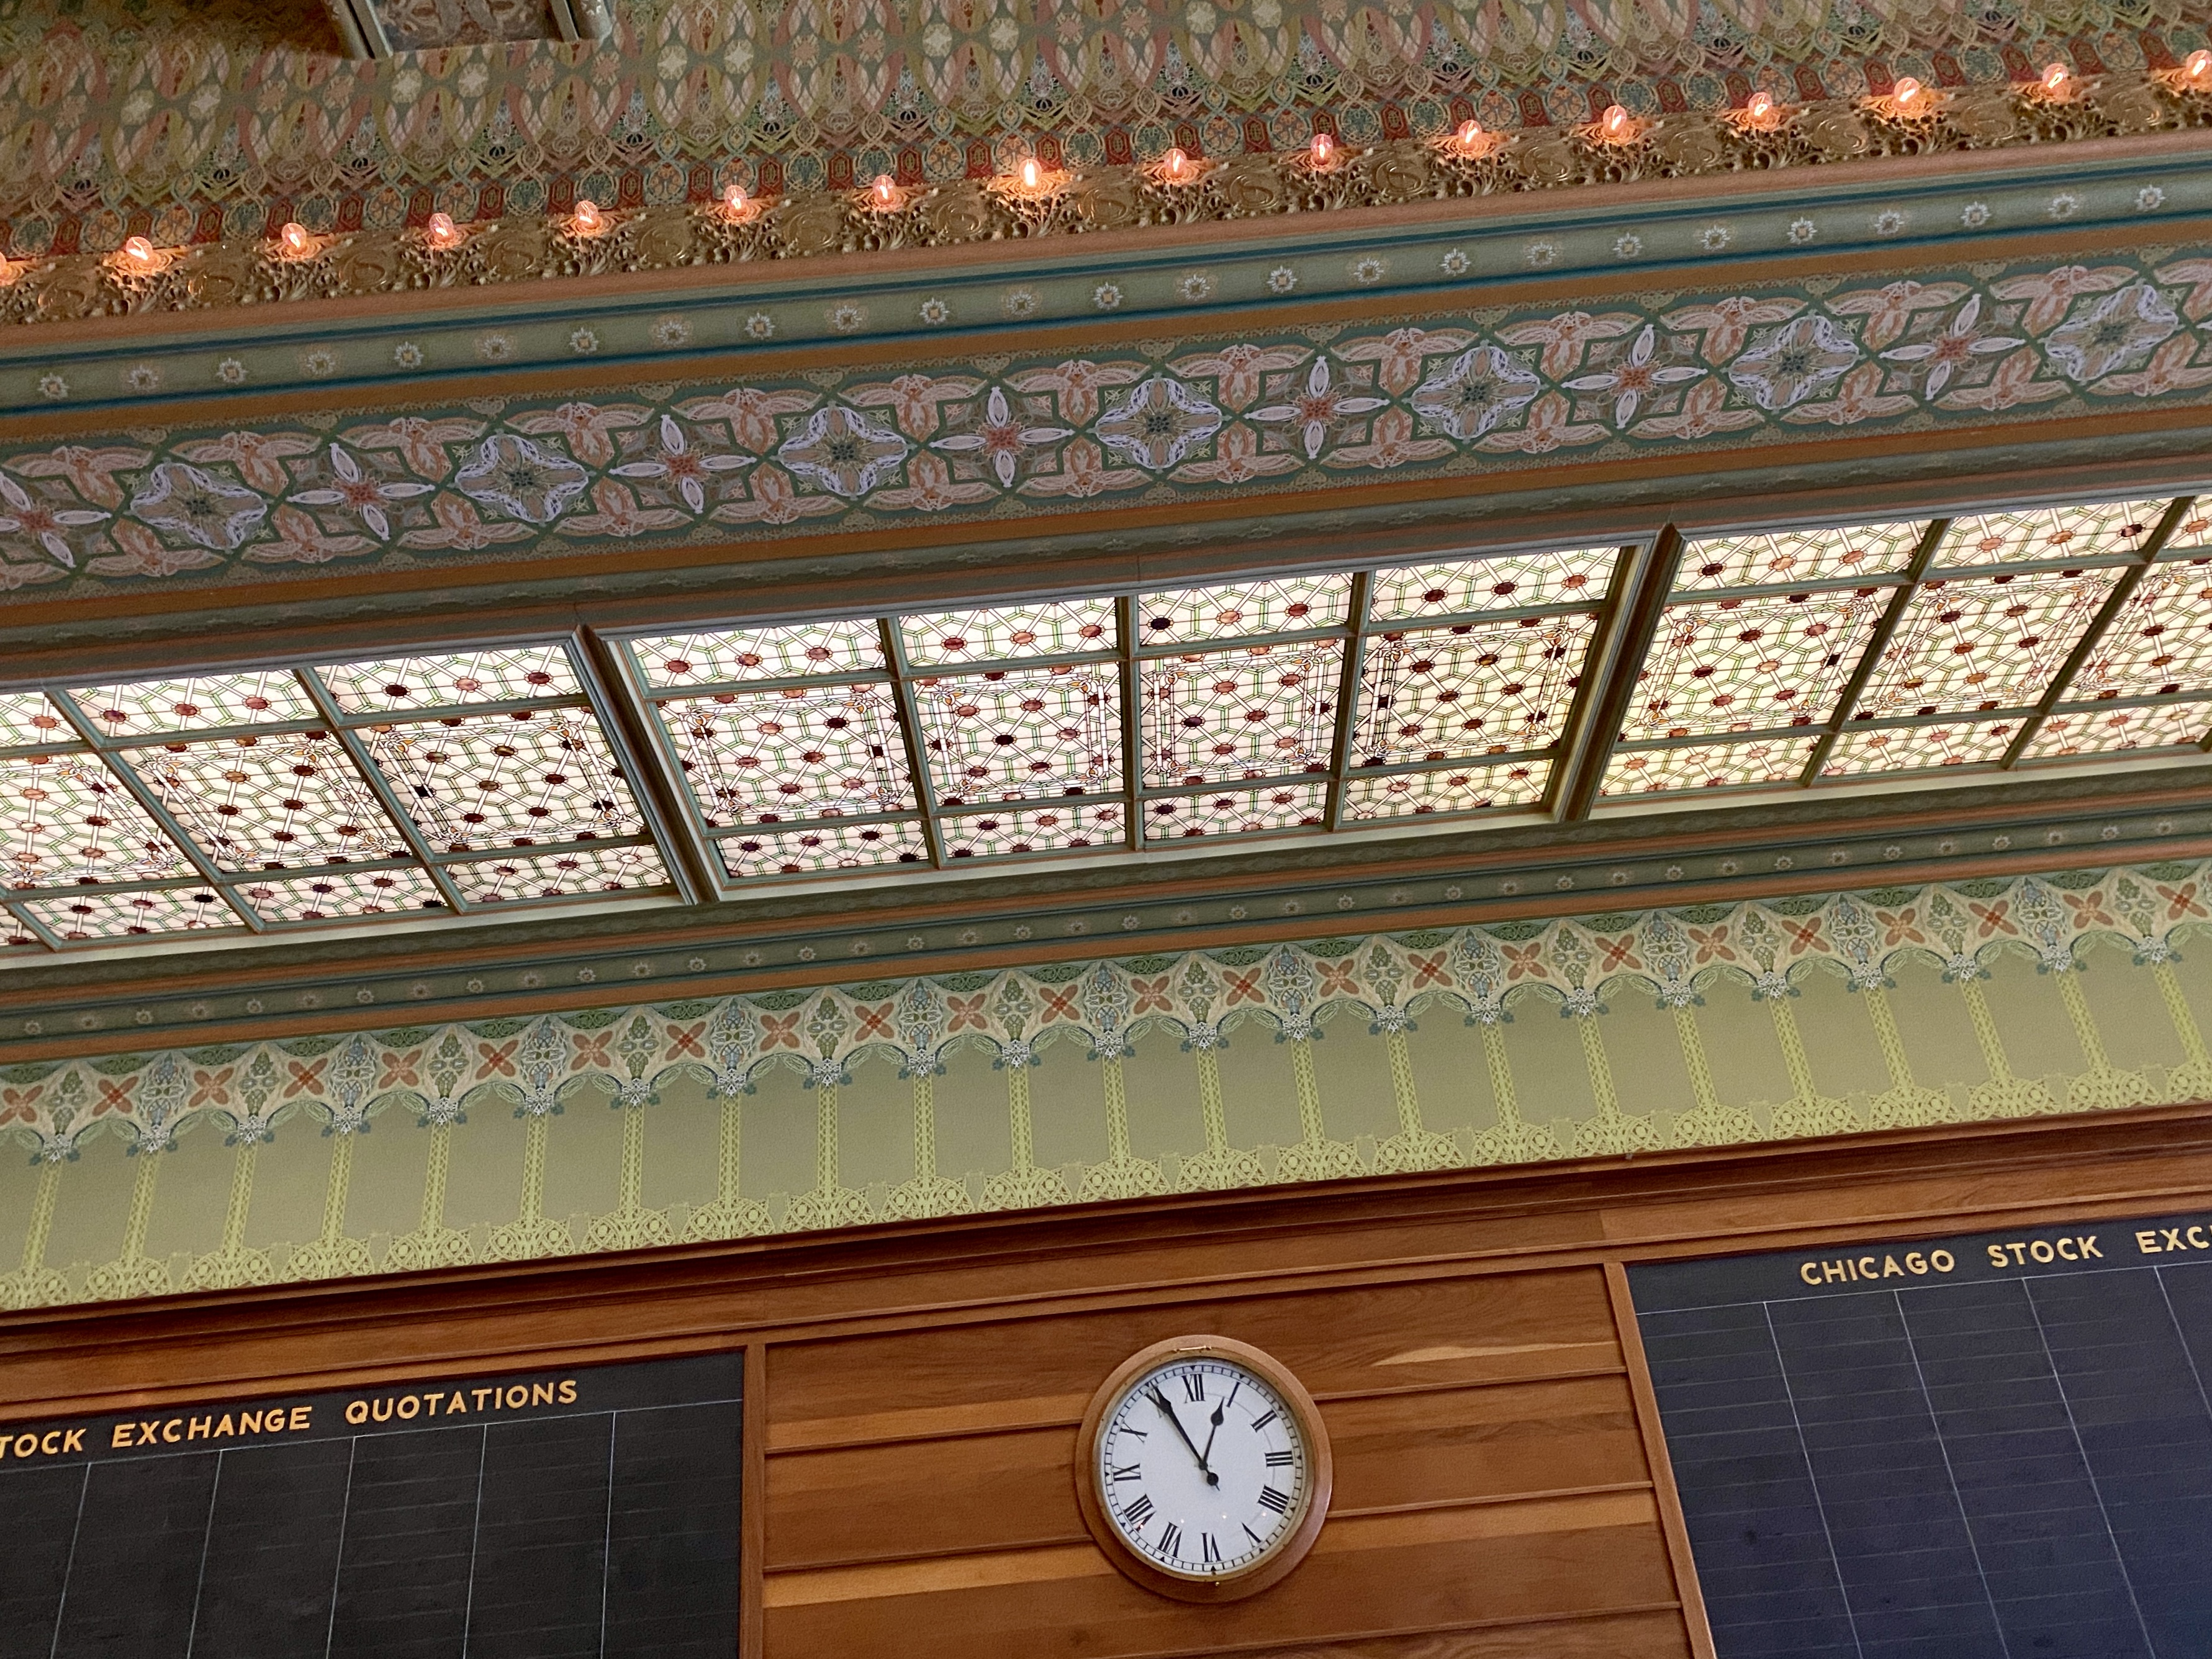 A slightly angled view of old Chicago Board of Trade stock chalkboards, wooden paneling, centered clock and ceiling intricately designed with Art Nouveau-style yellow and green flourishes